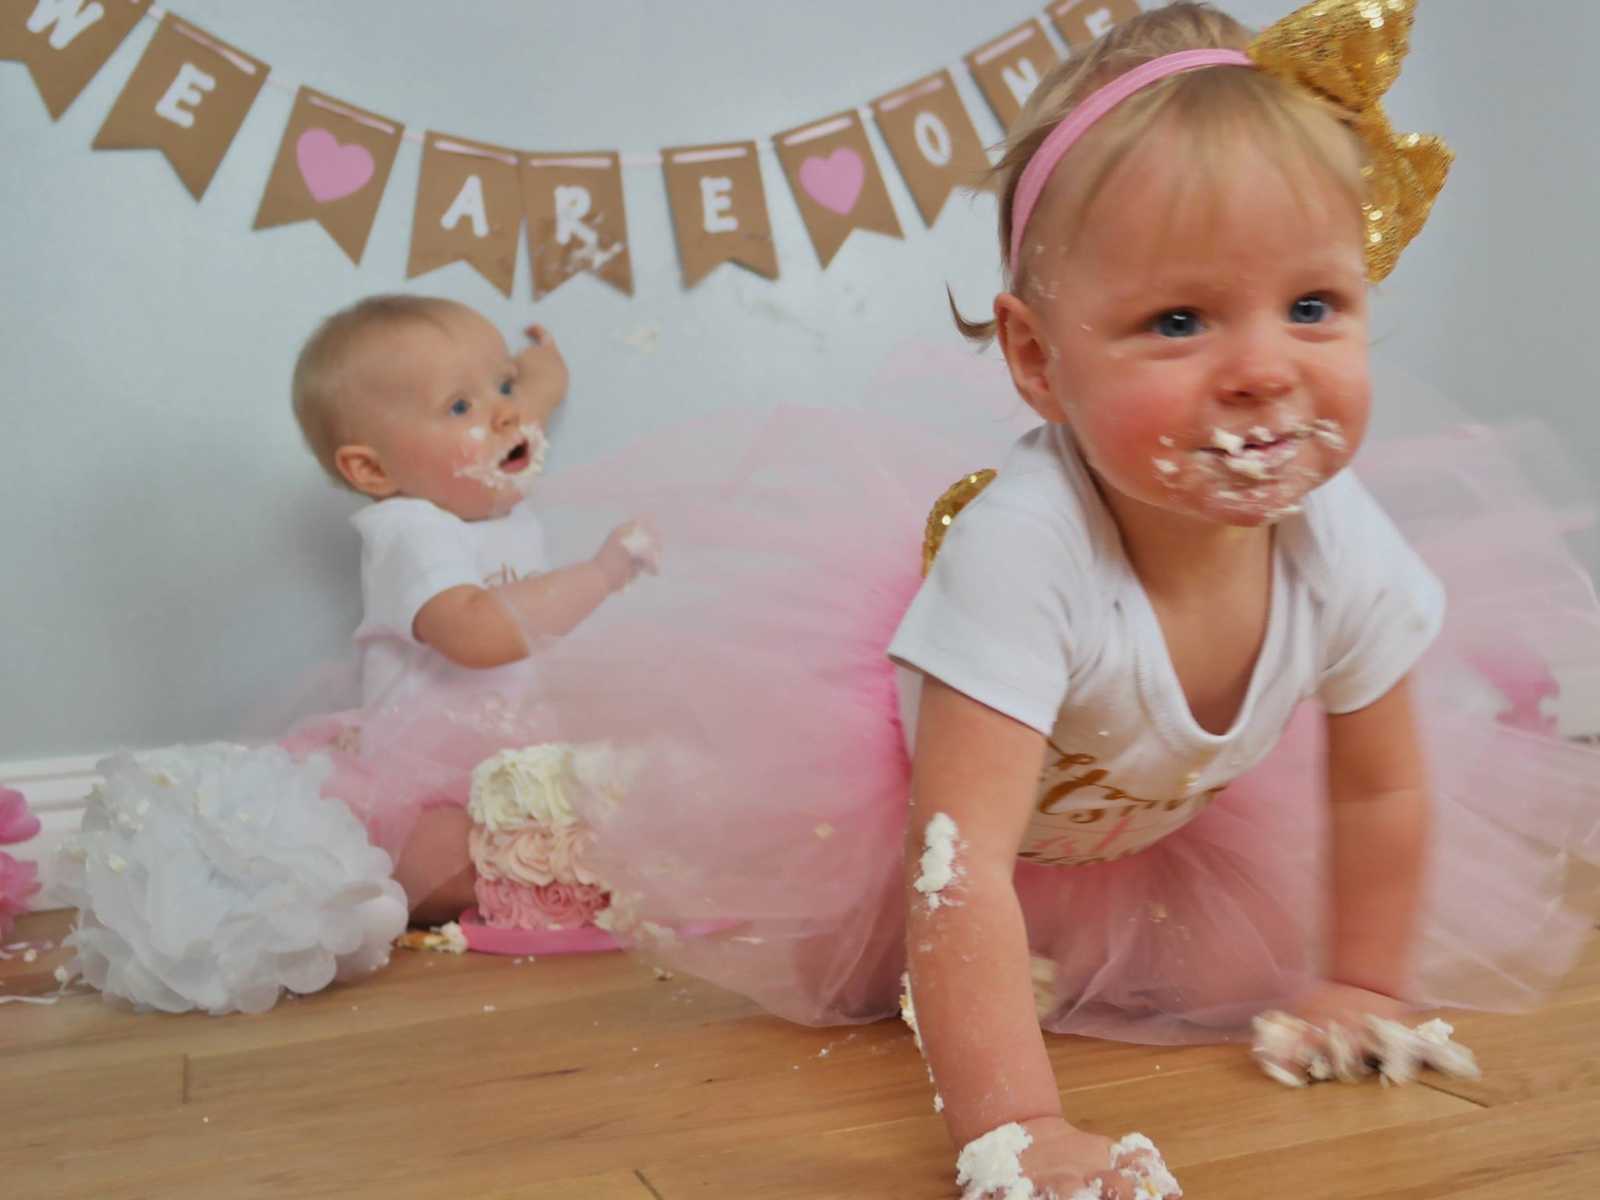 baby with birthday cake all over her crawls on table while baby in background points to banner saying, "we are one"